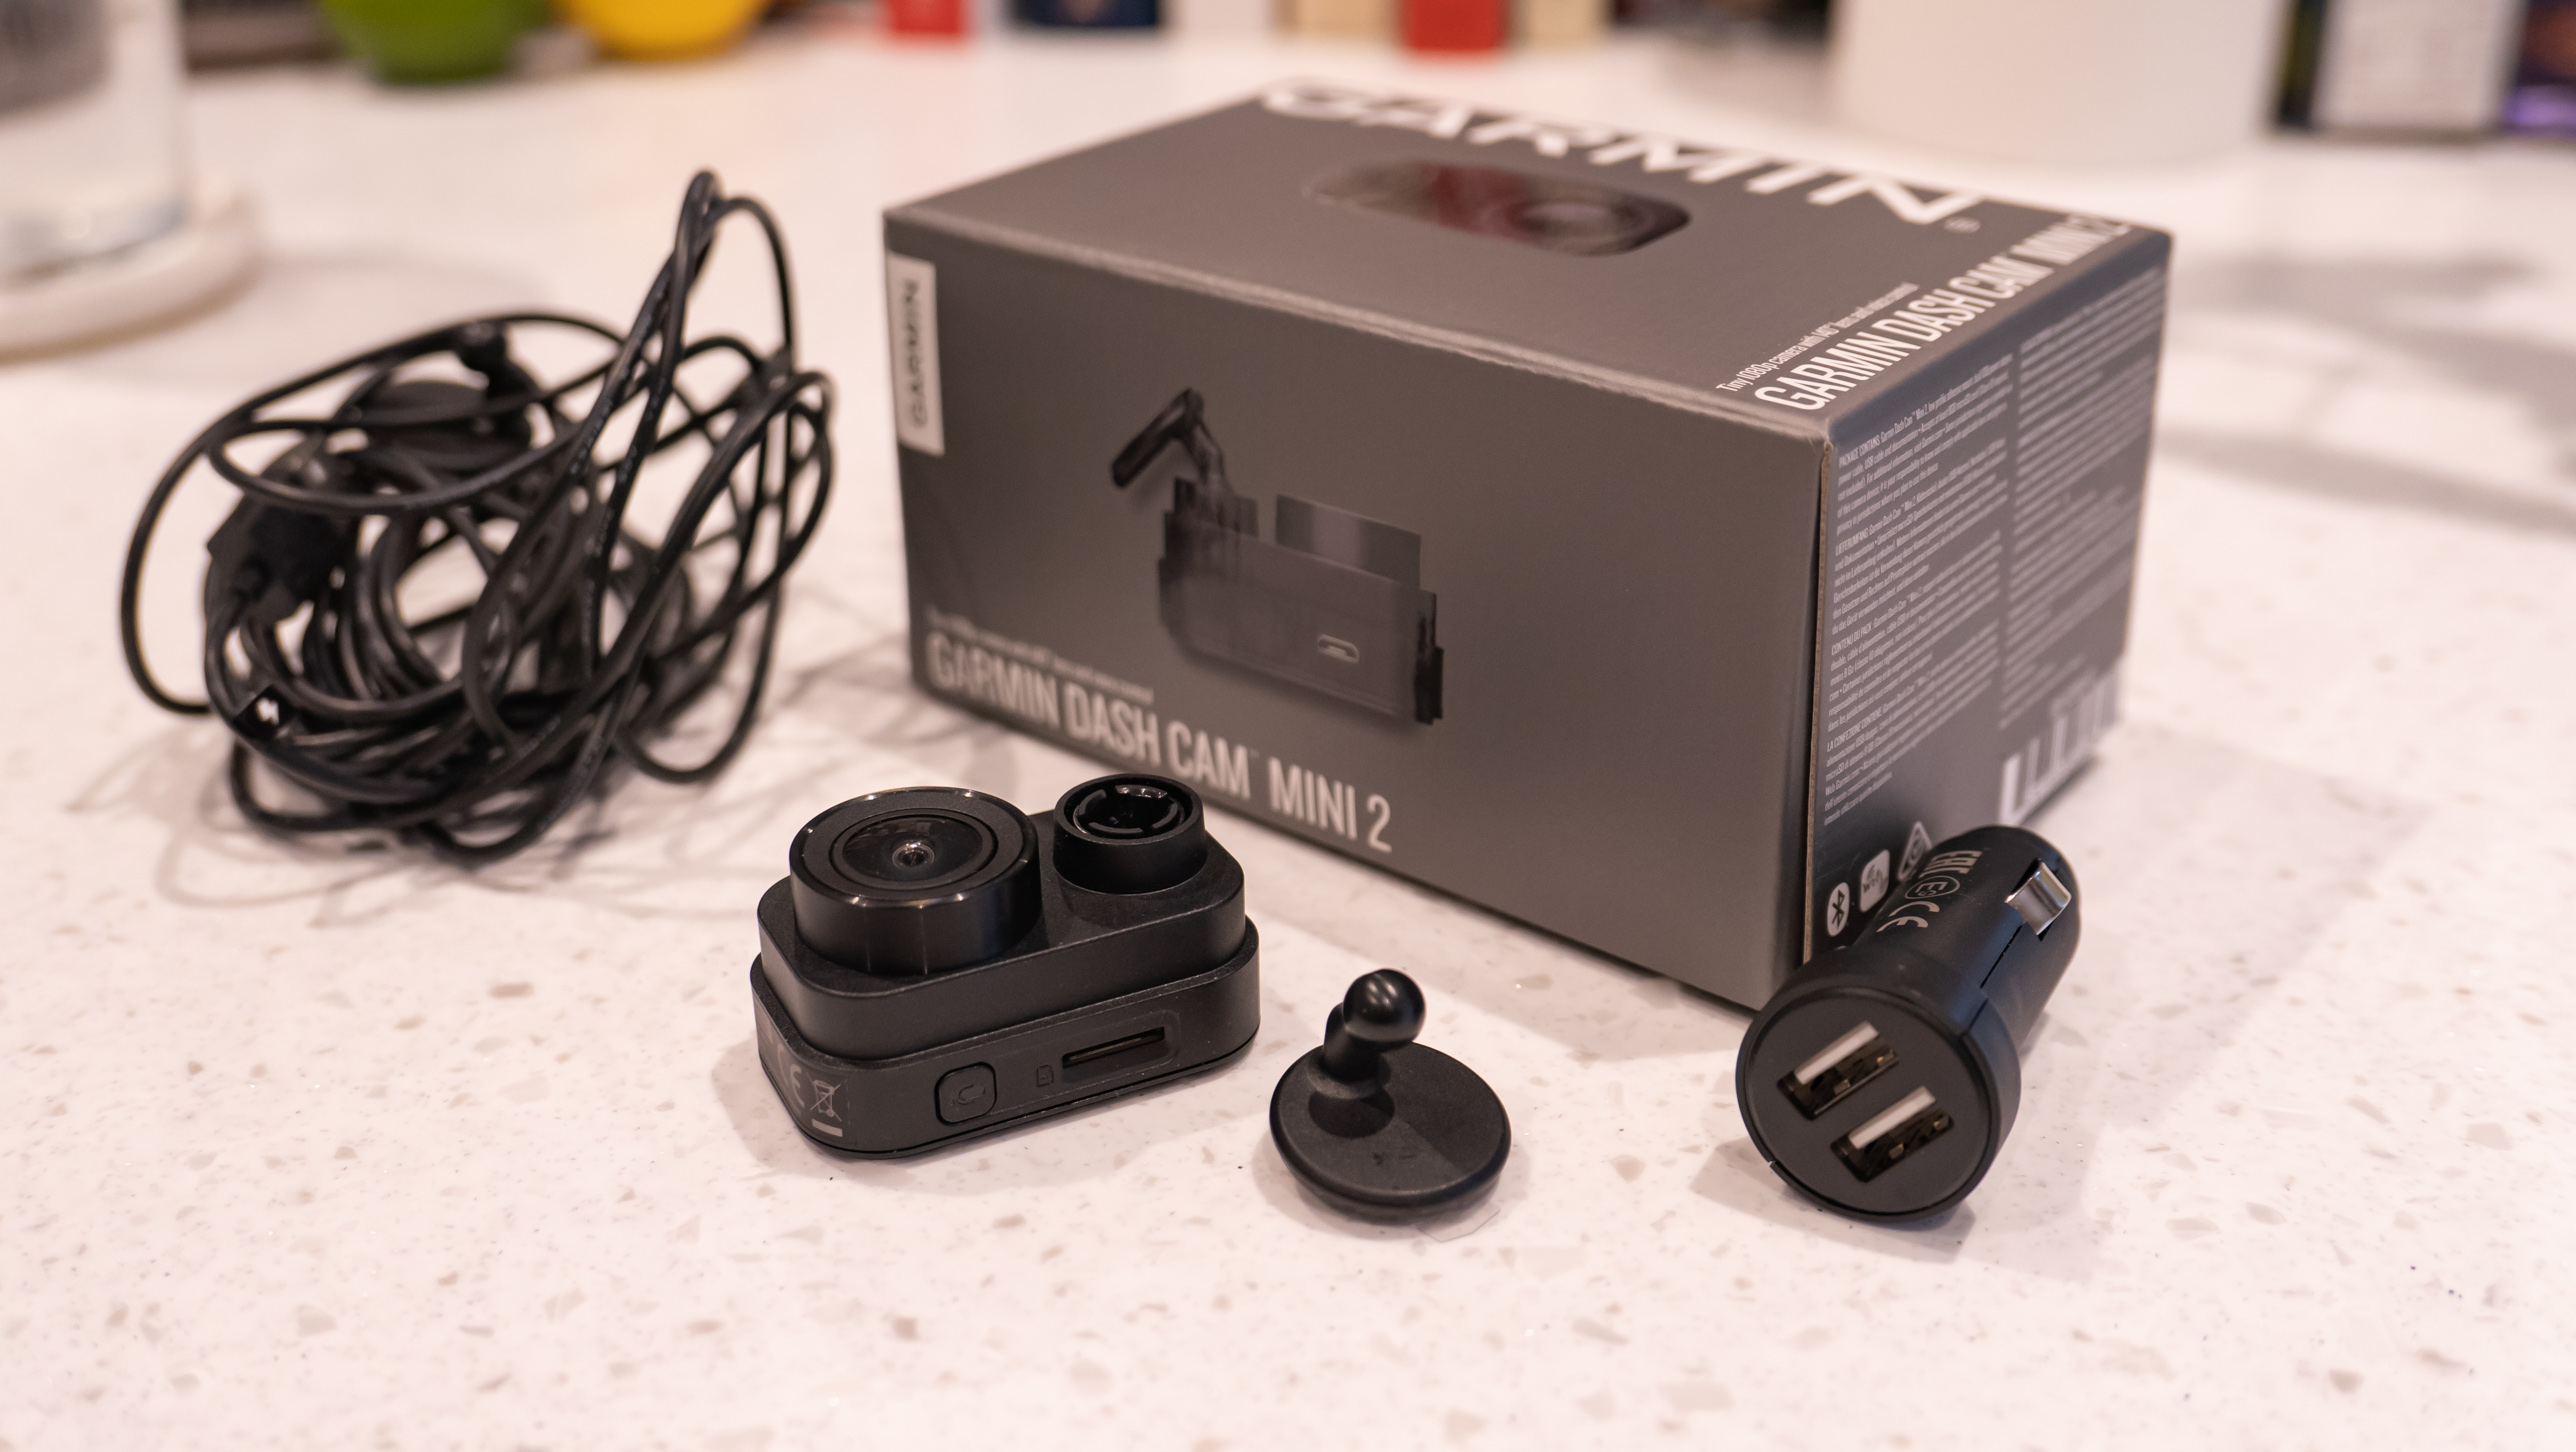 Garmin Dash Cam Mini 2 with its box on the table